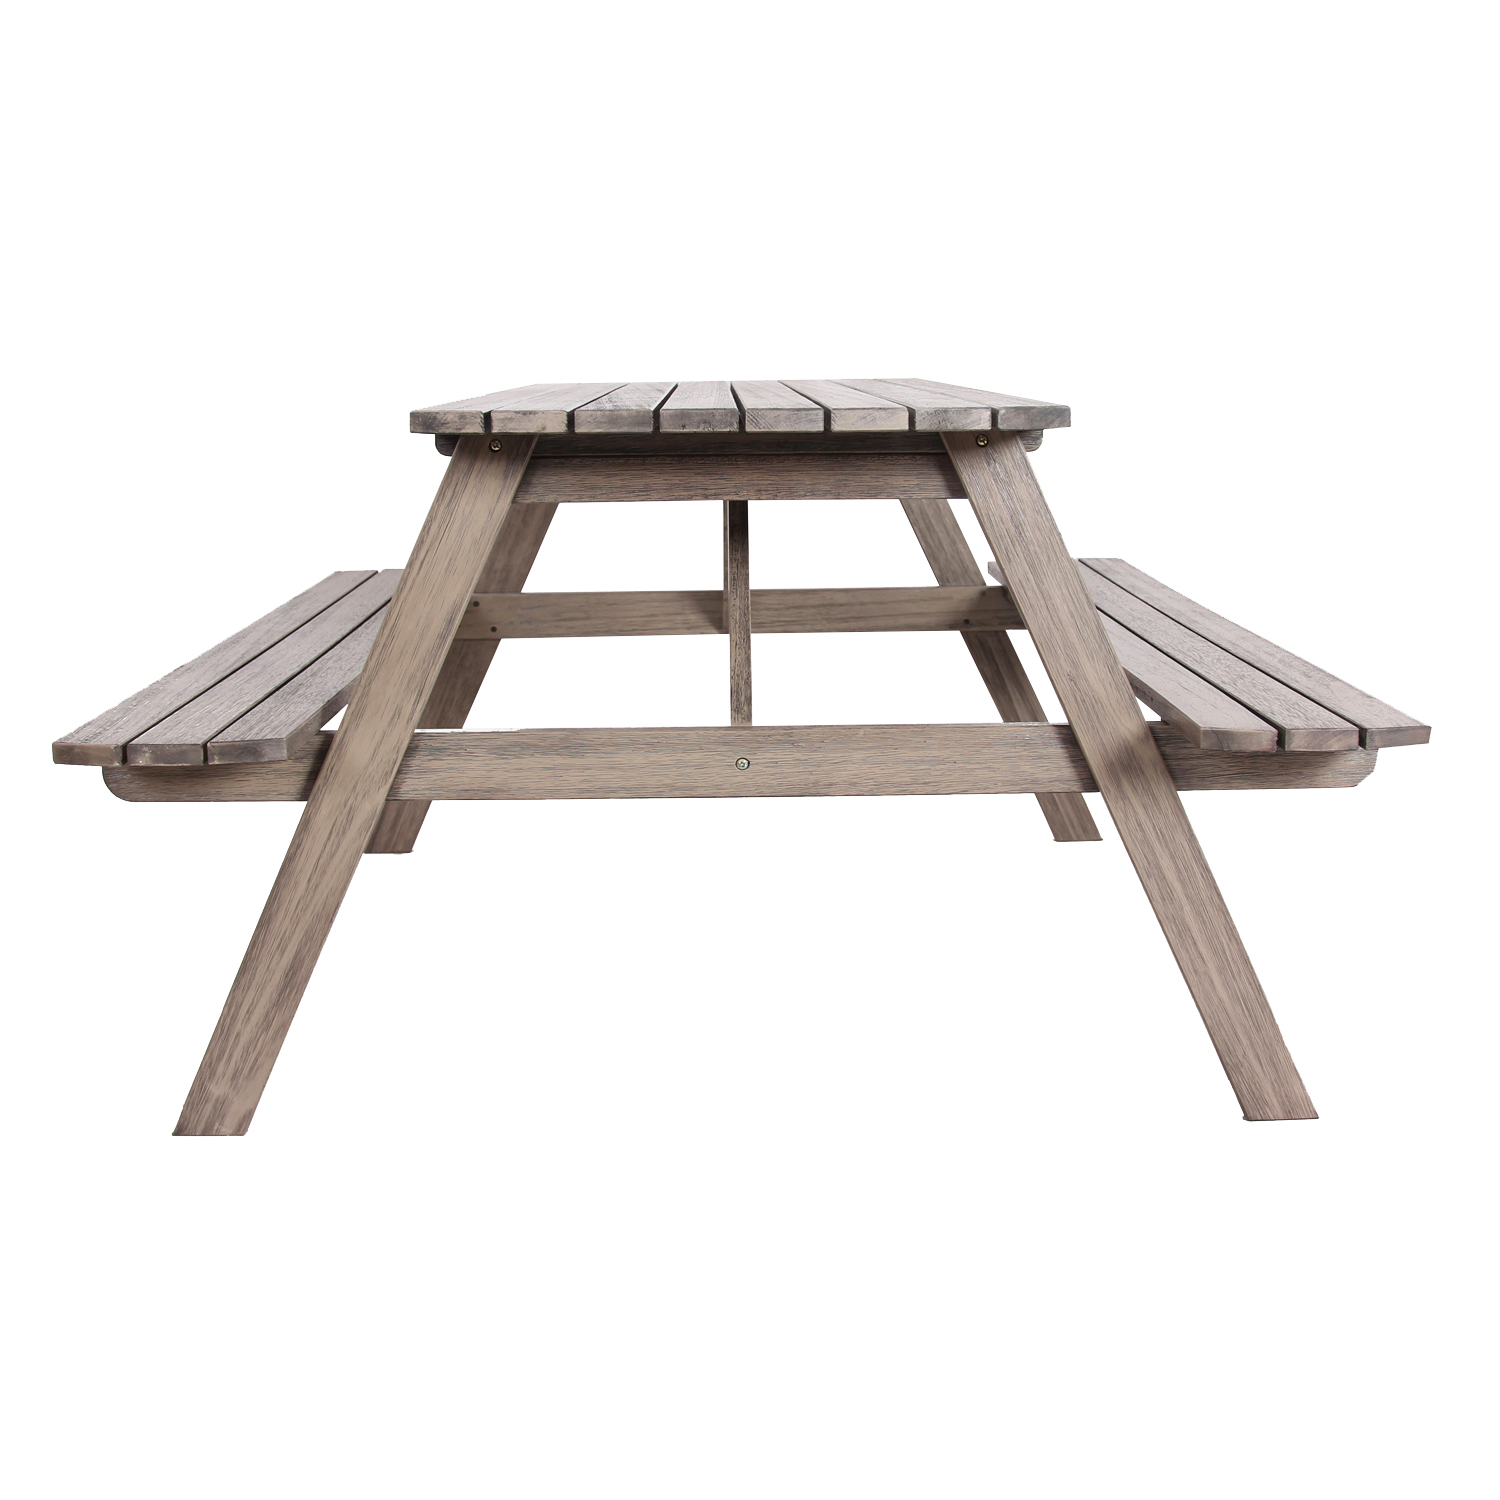 Mainstays Martis Bay Wood Outdoor Picnic Table, Gray - image 4 of 6